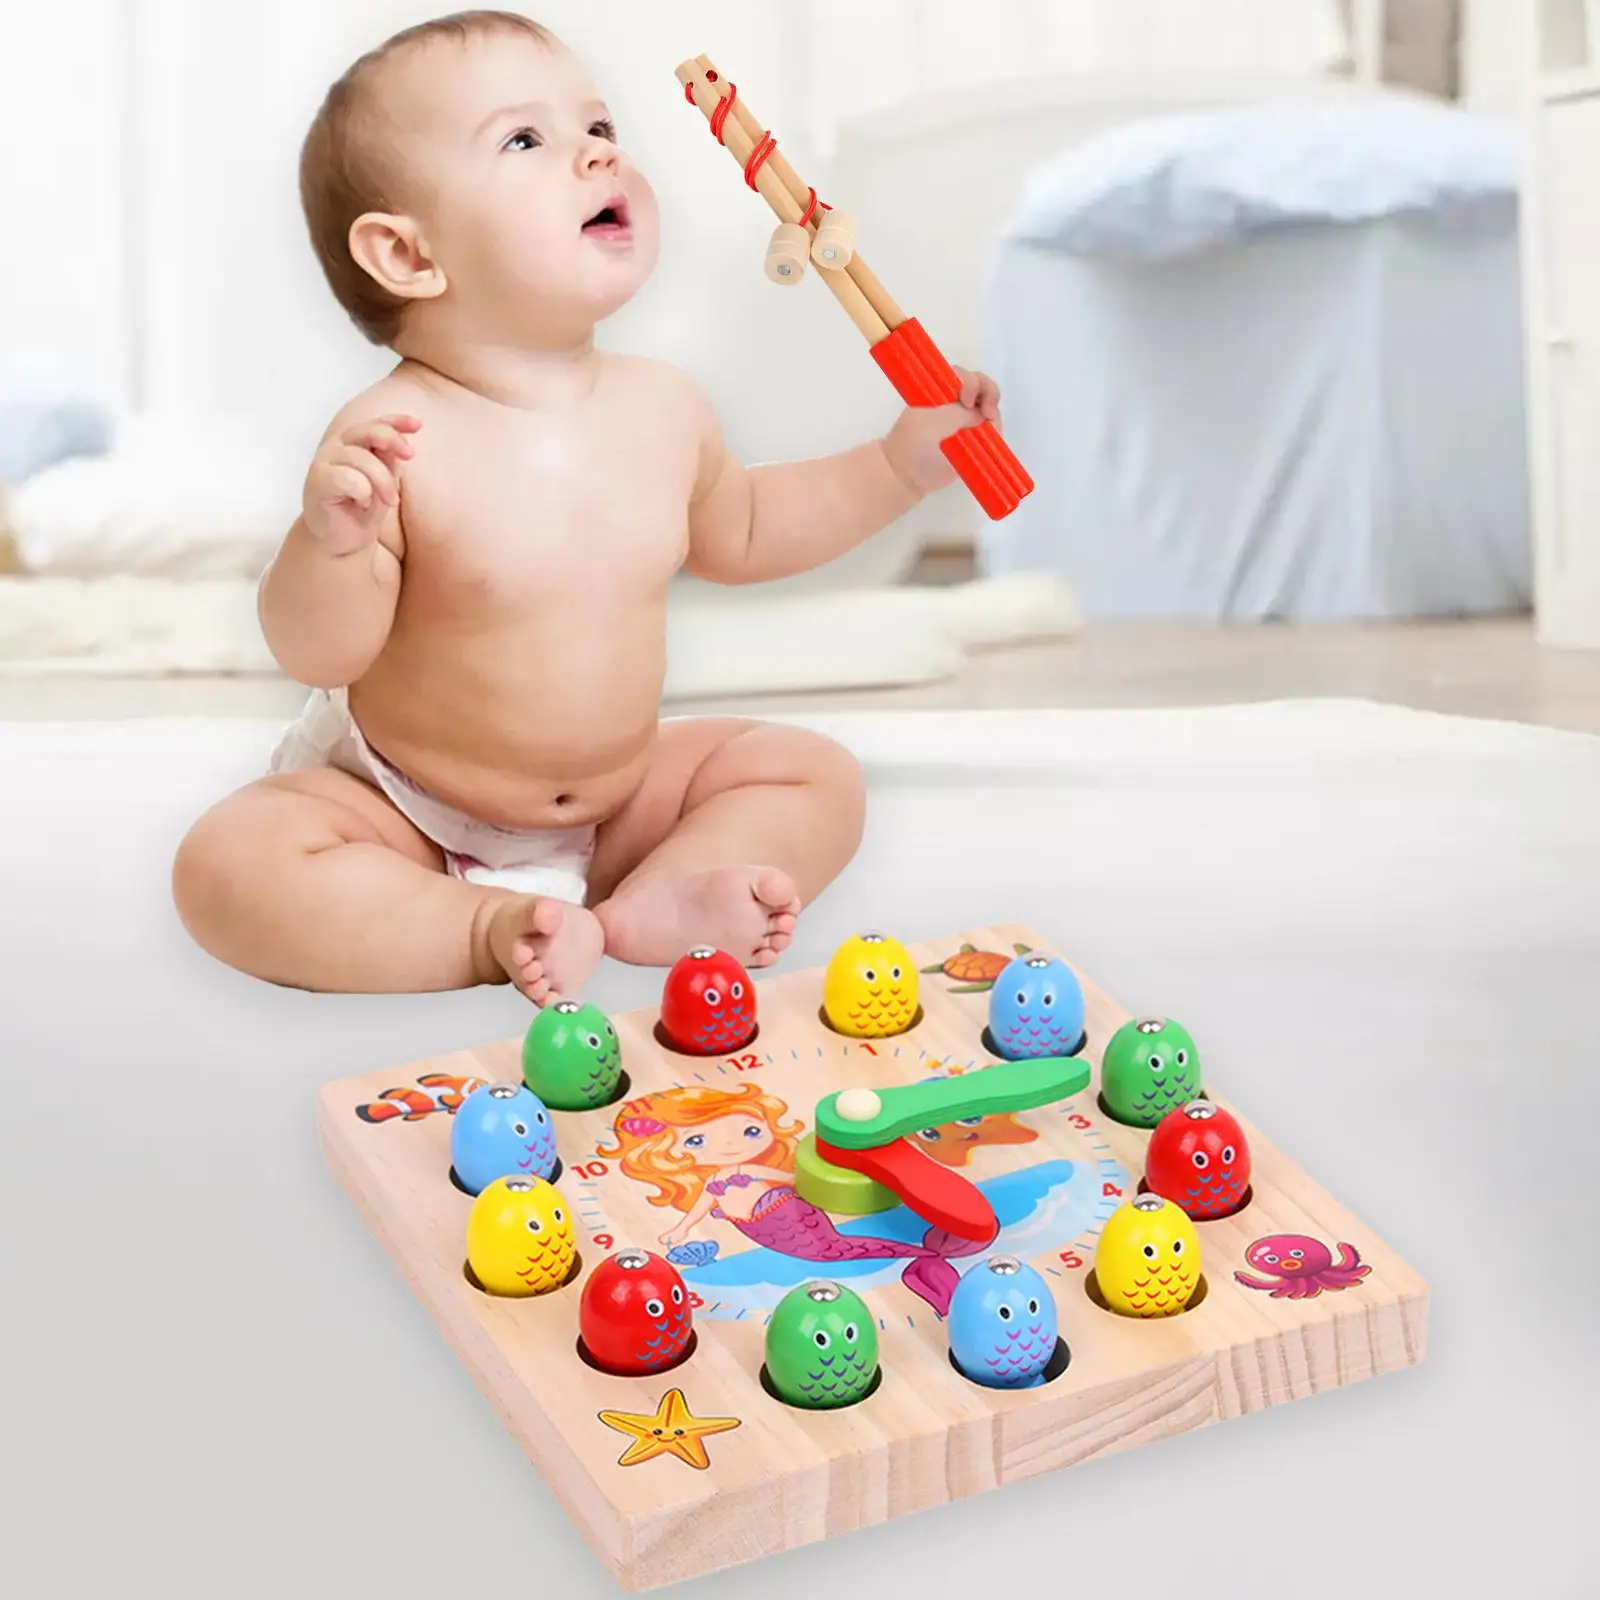 Wooden Fishing Game Toy Motor Skills Preschool Learning for 3 4 5 Year Old Birthday Gifts